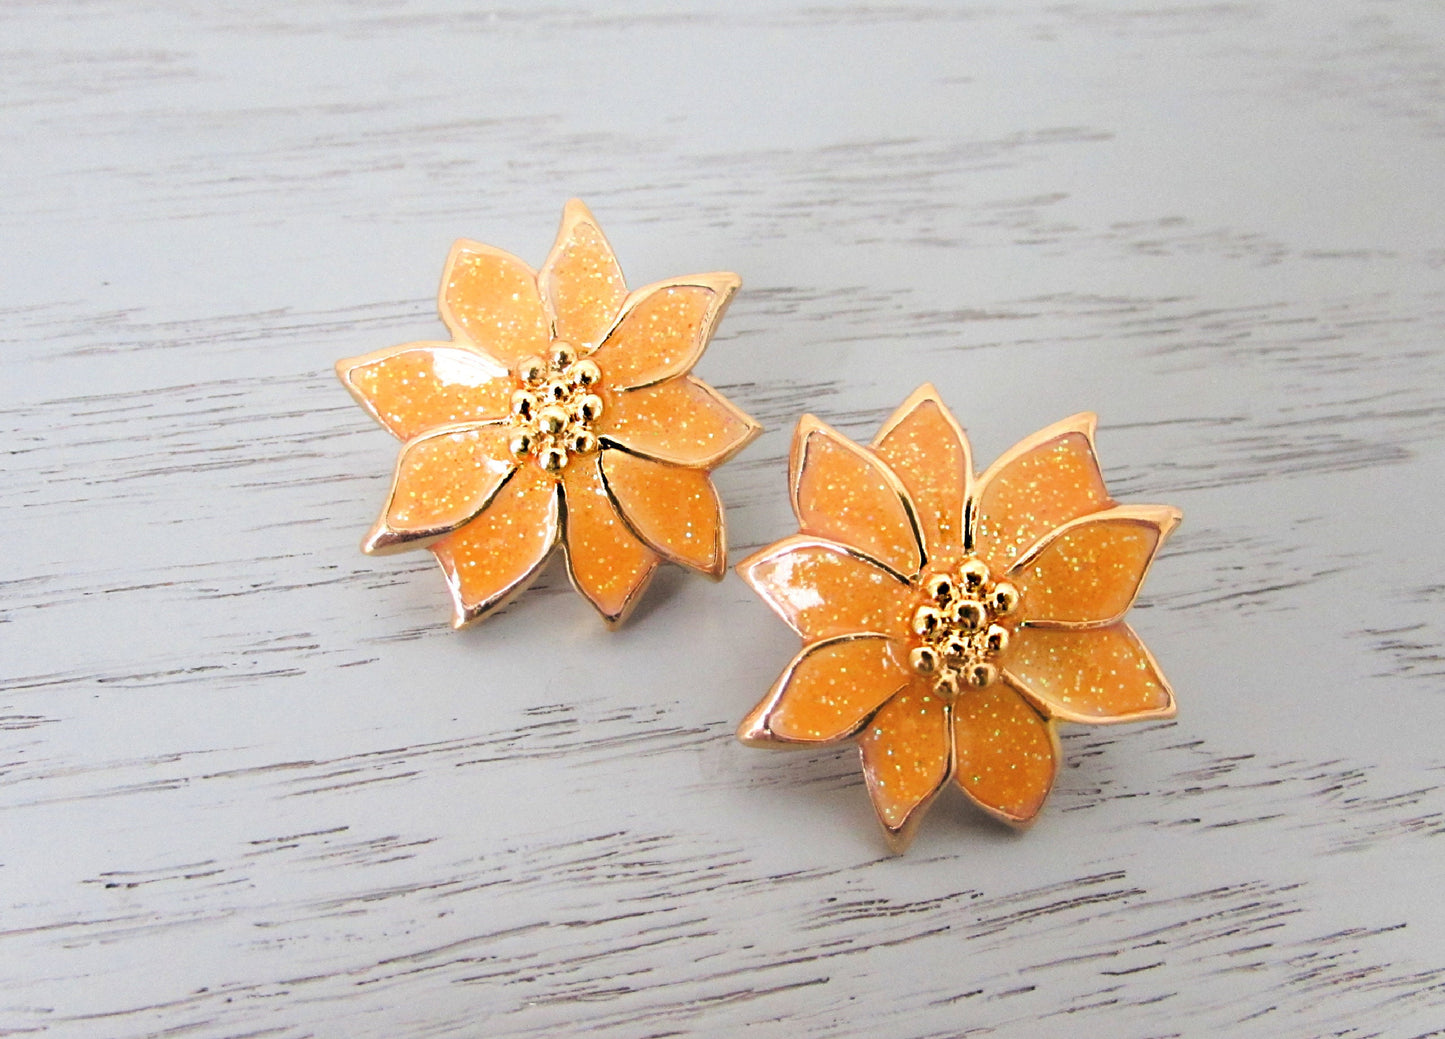 Vintage Enamel Flower Earrings, Yellow and Gold Glitter Floral Clip-On Statement Earrings, Big Vintage Earrings, Iridescent Glitter Earrings